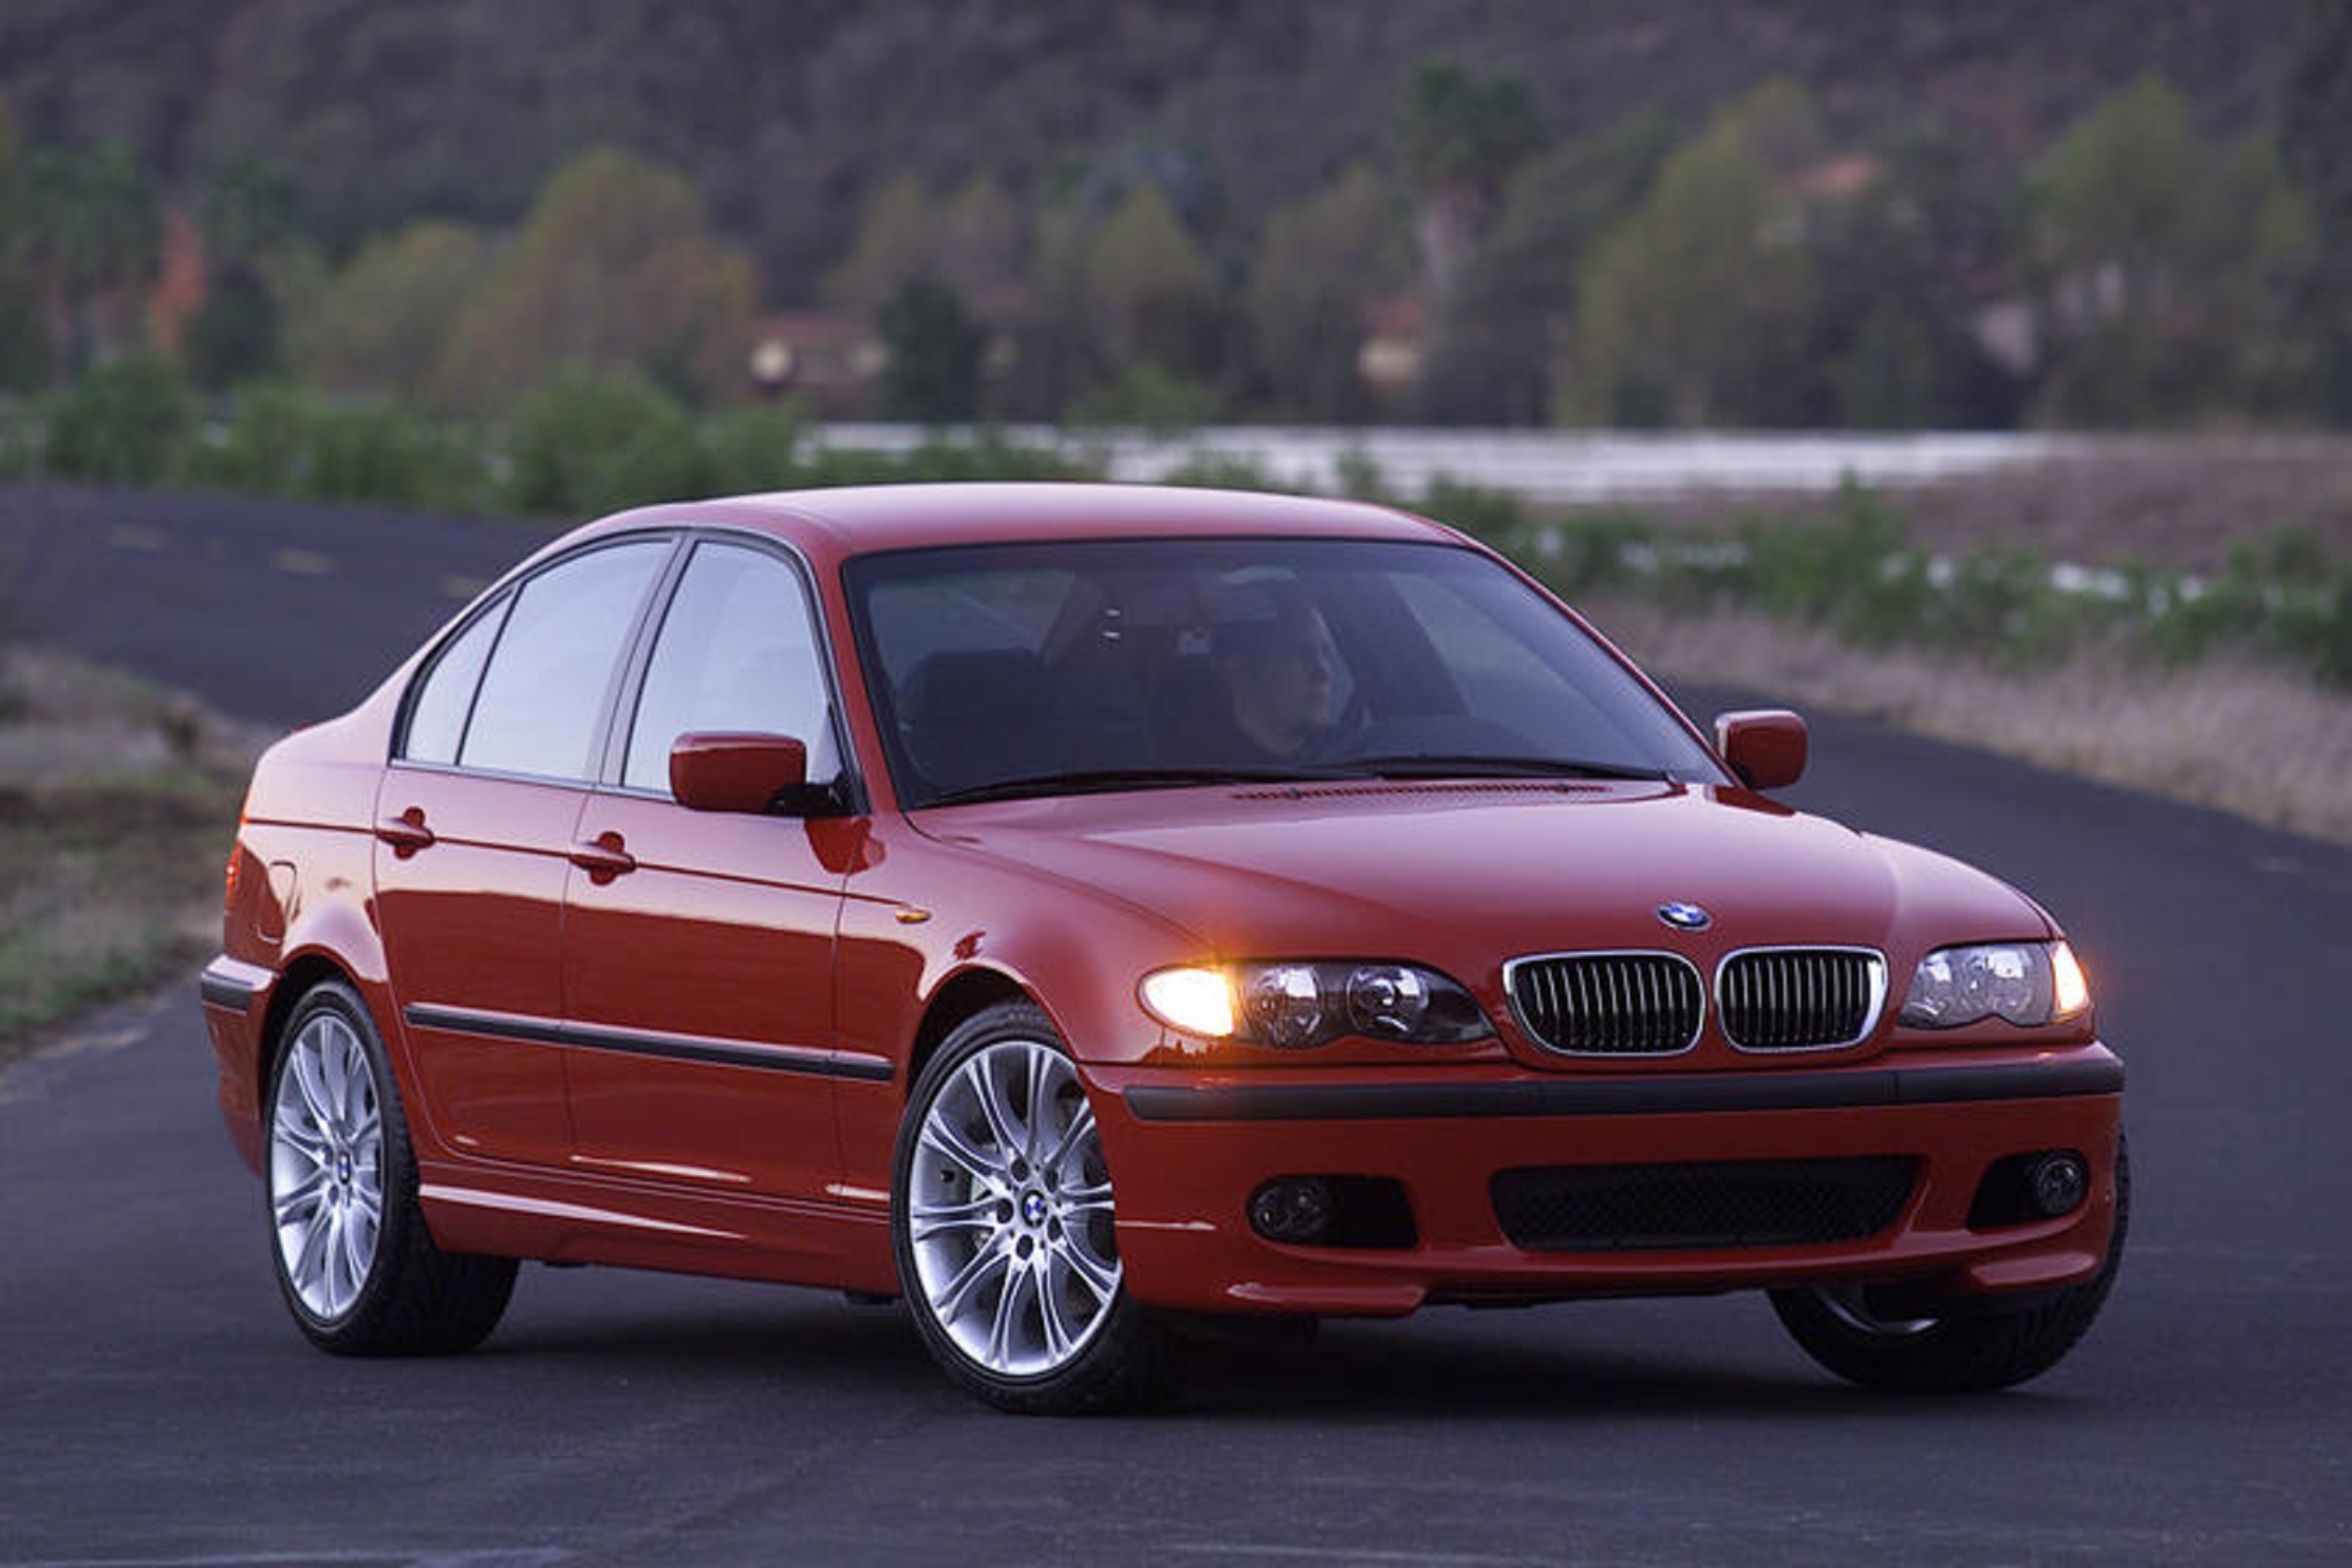 A red E46 BMW 330i ZHP on a desert road